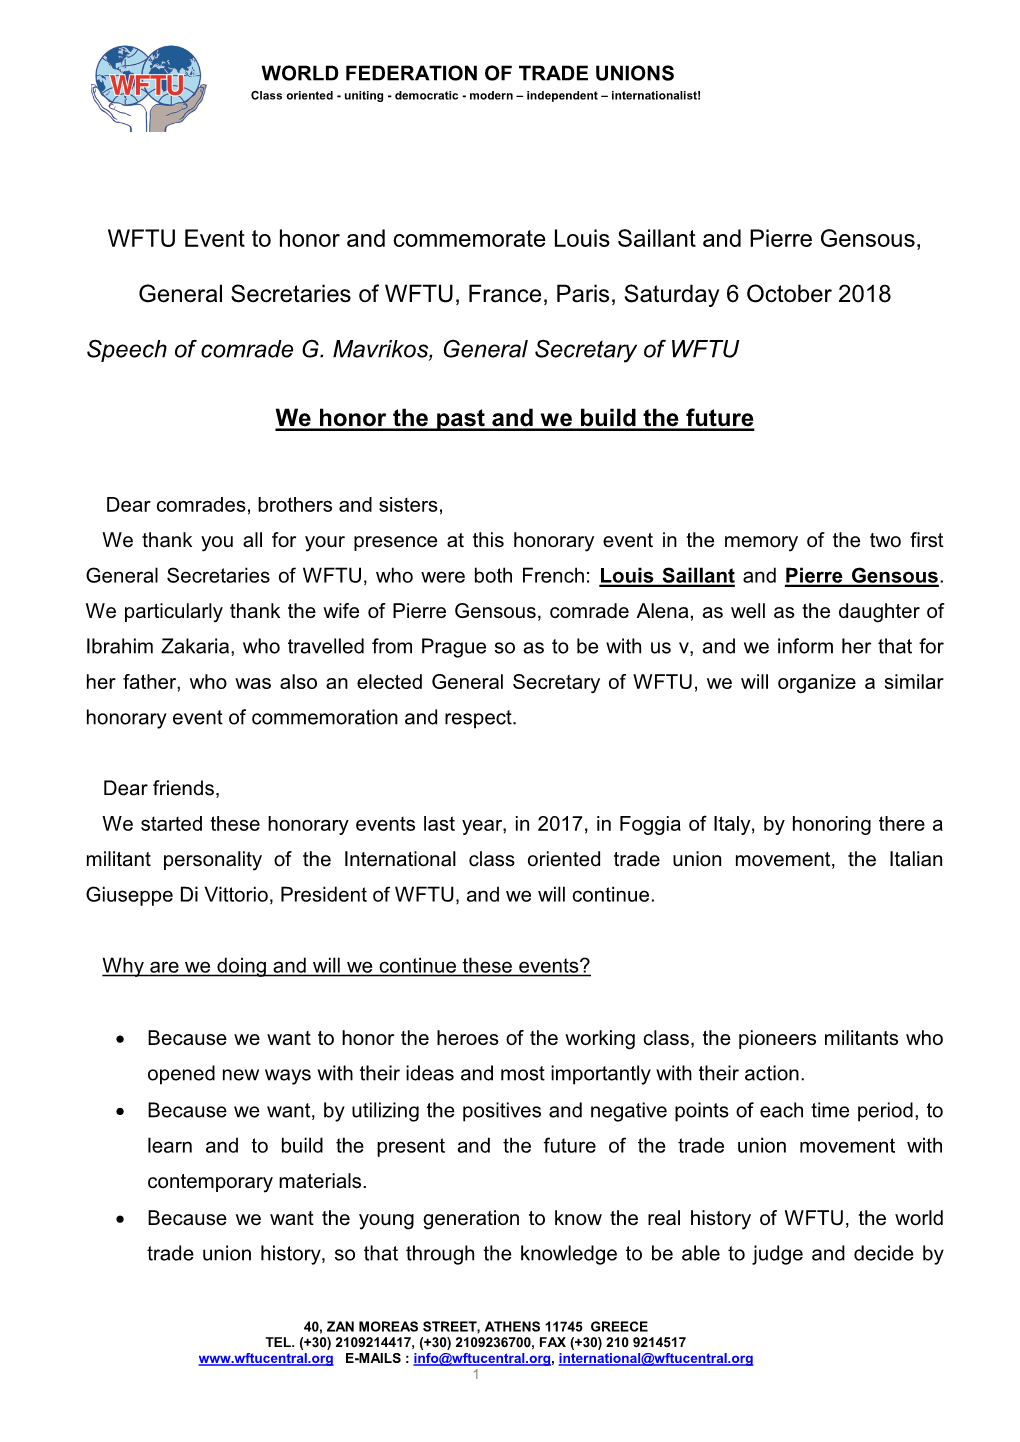 WFTU Event to Honor and Commemorate Louis Saillant and Pierre Gensous